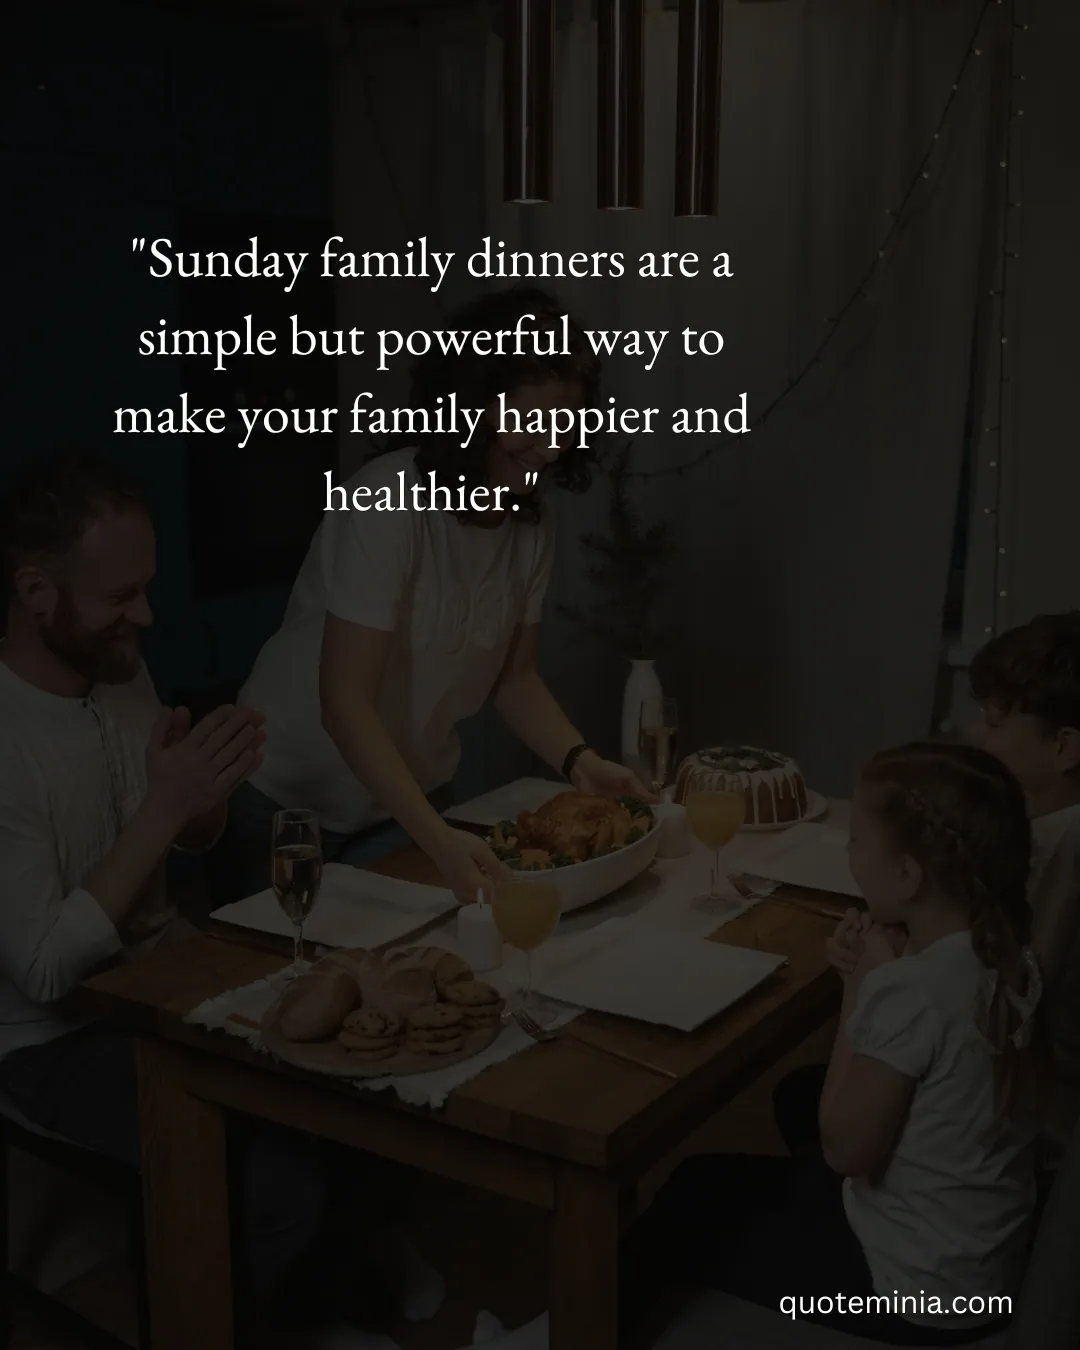 Sunday Family Dinner Quotes 2